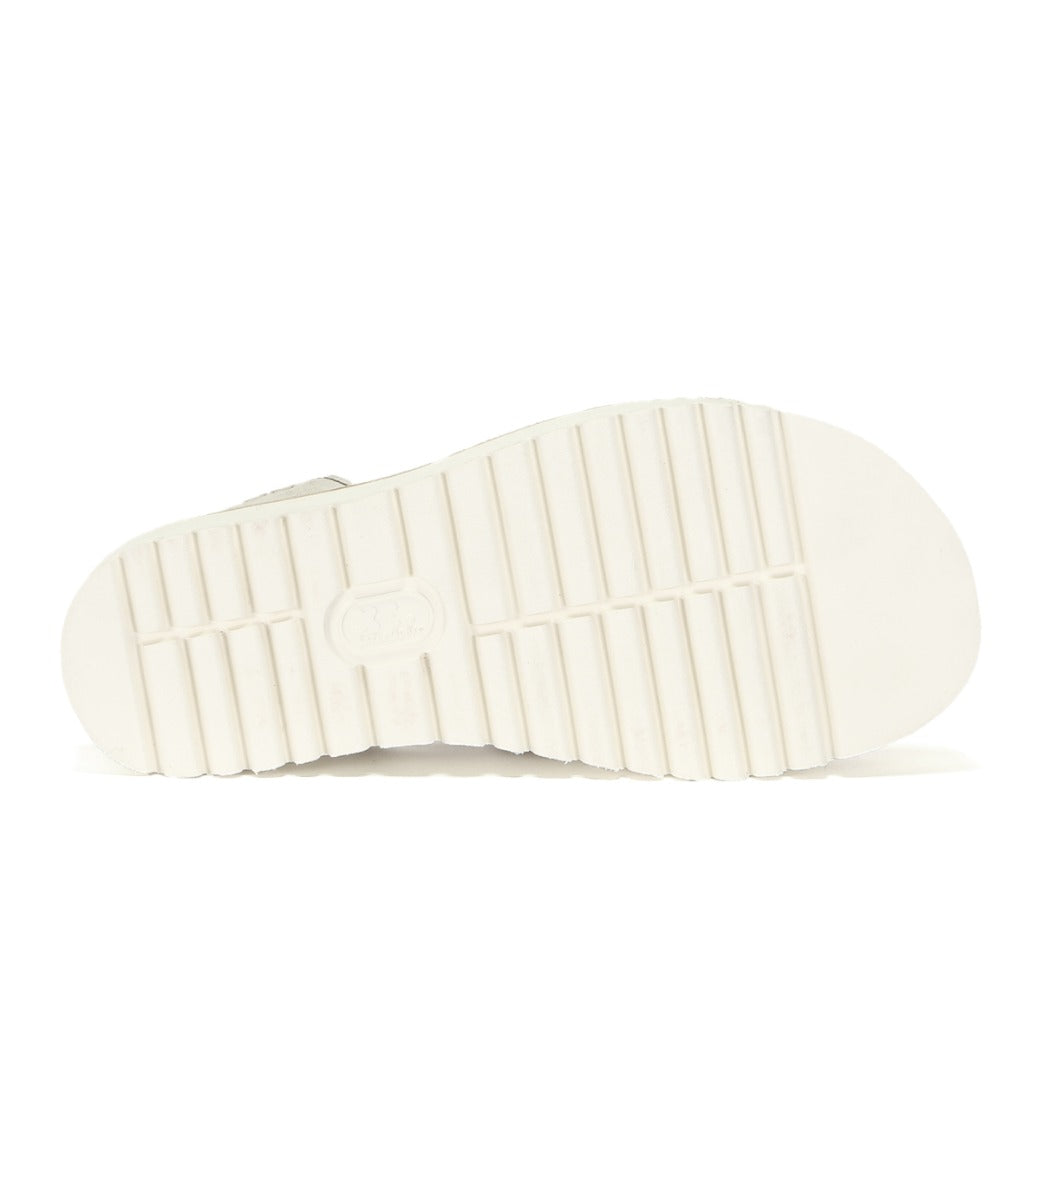 White sole of Clancy white leather sandals by Bed Stu.